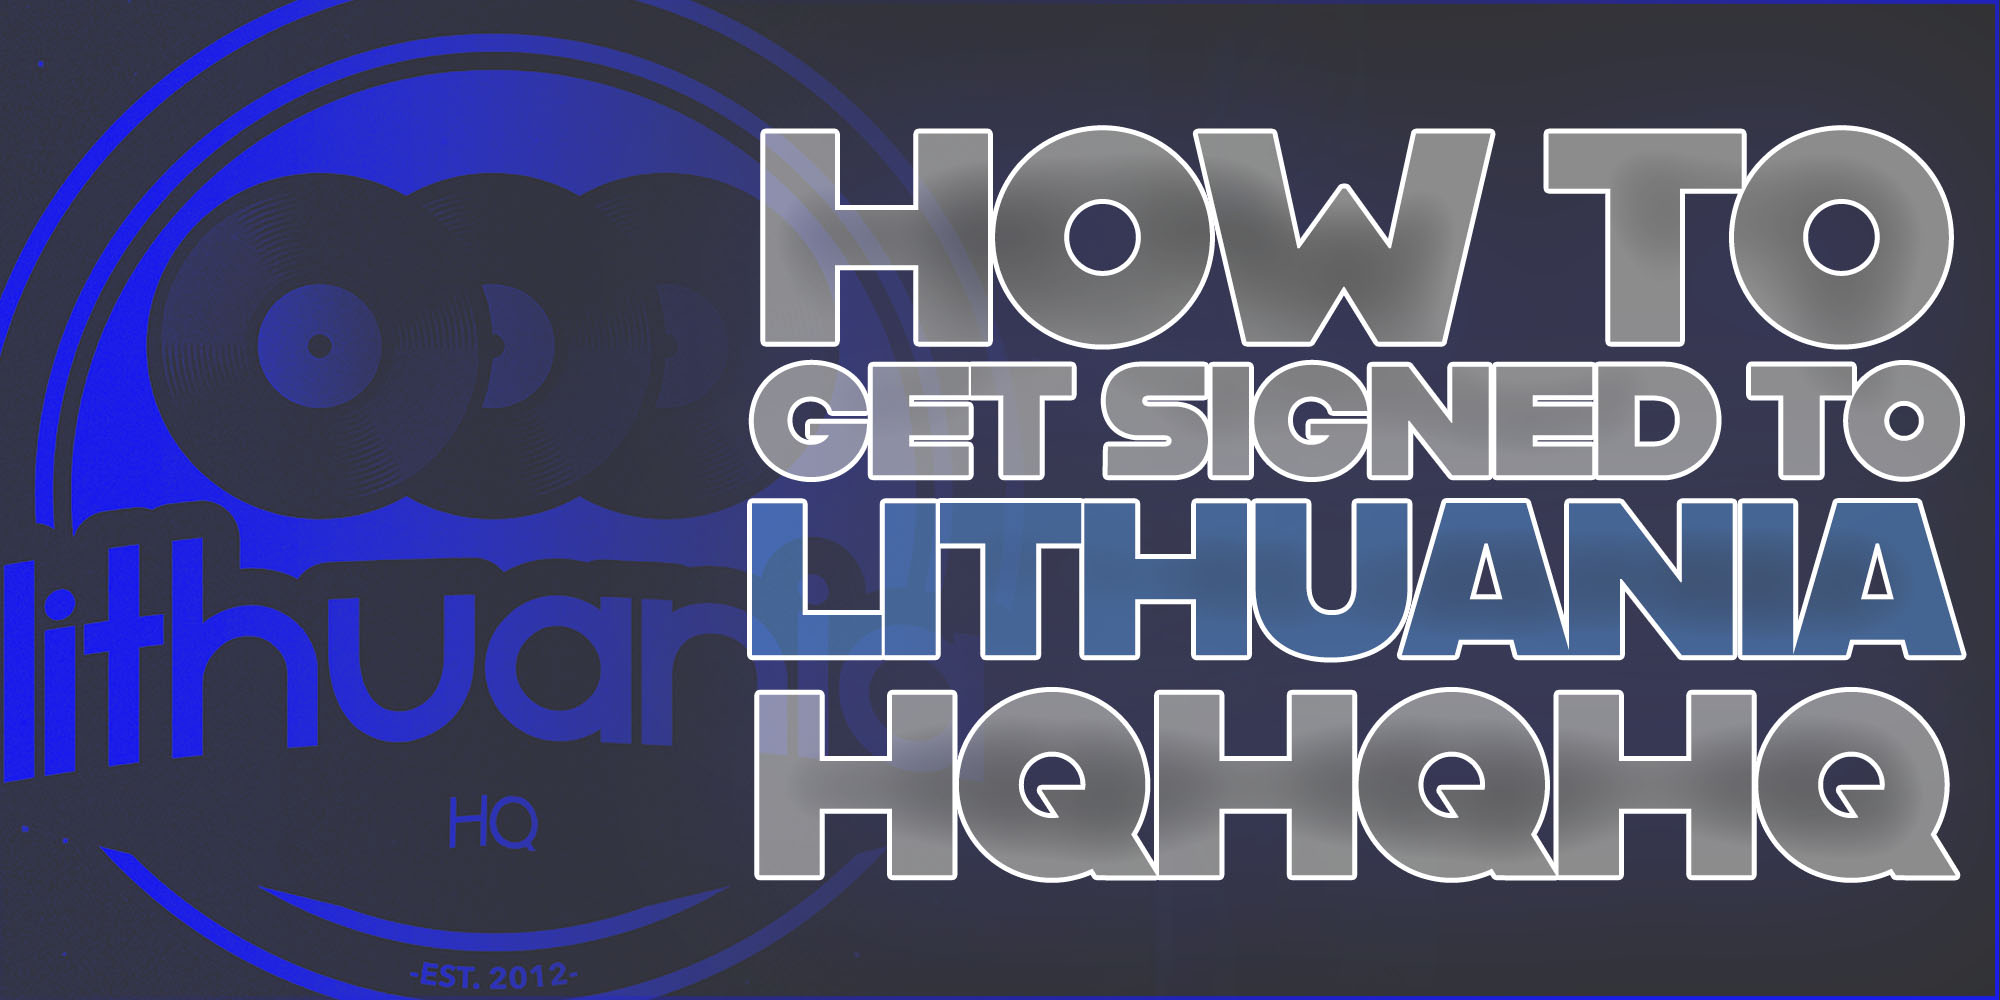 How To Get on Lithuania Hq